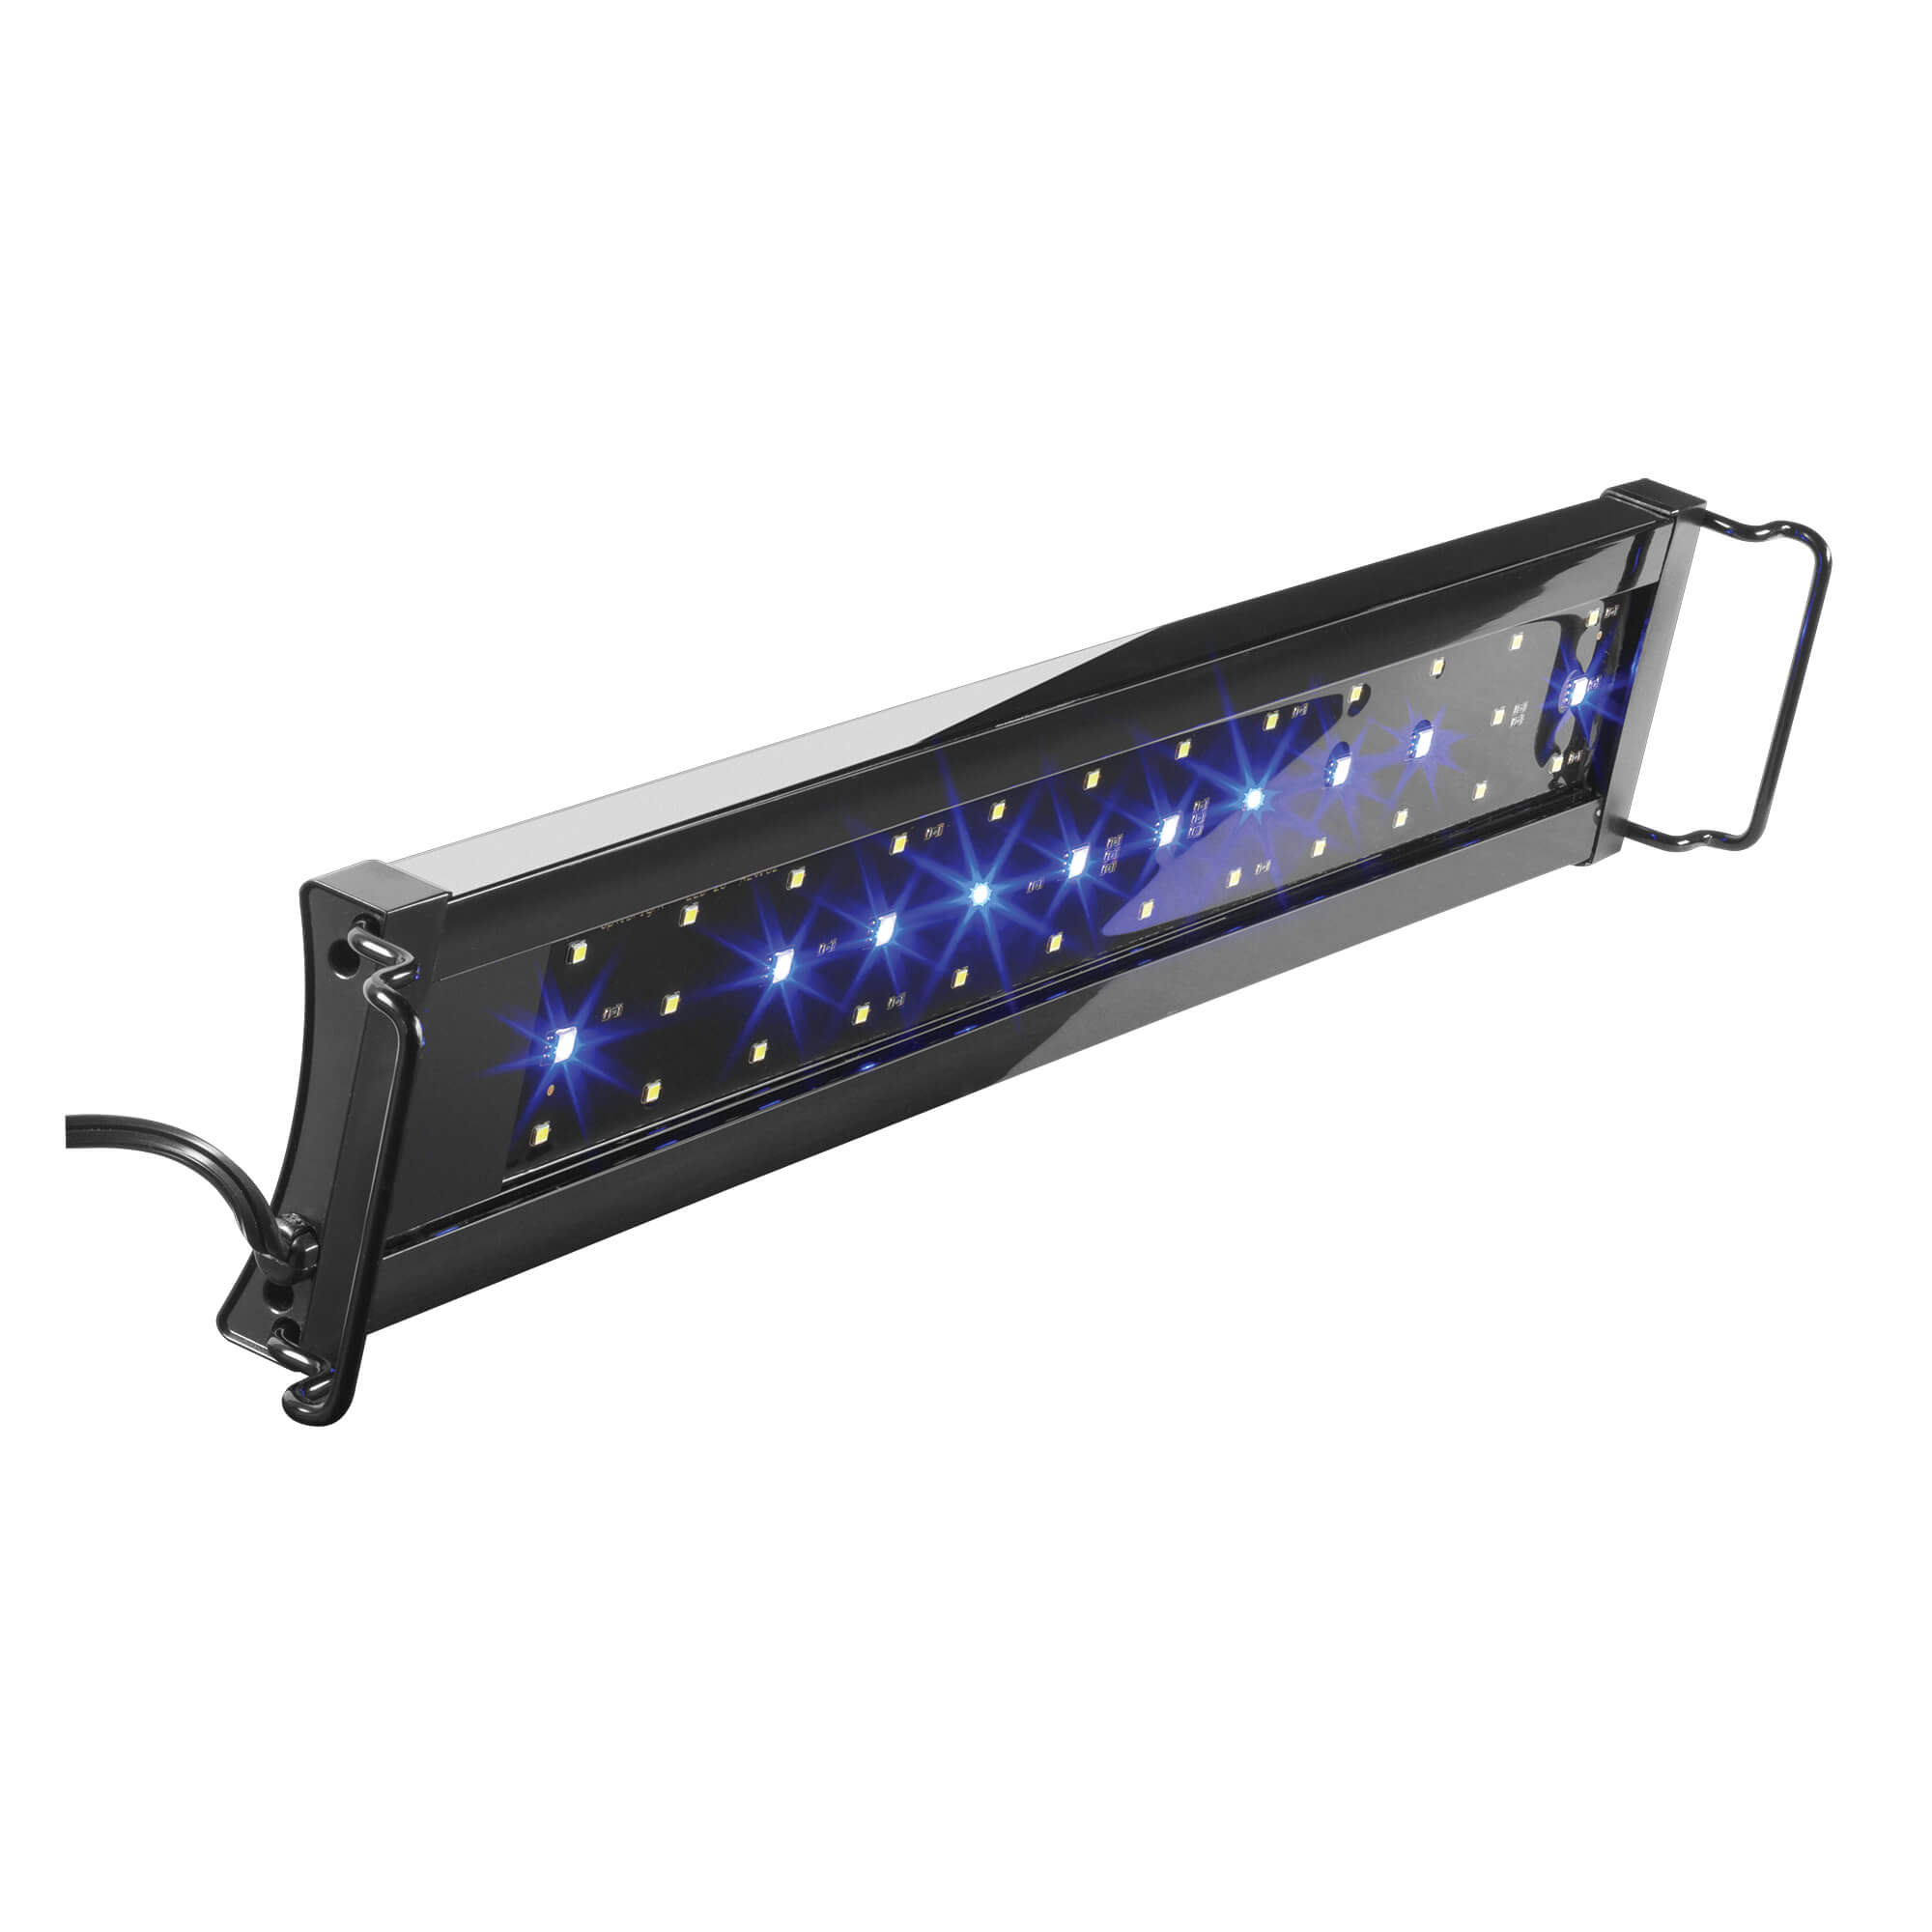 Dialing in your programmable LED aquarium light.